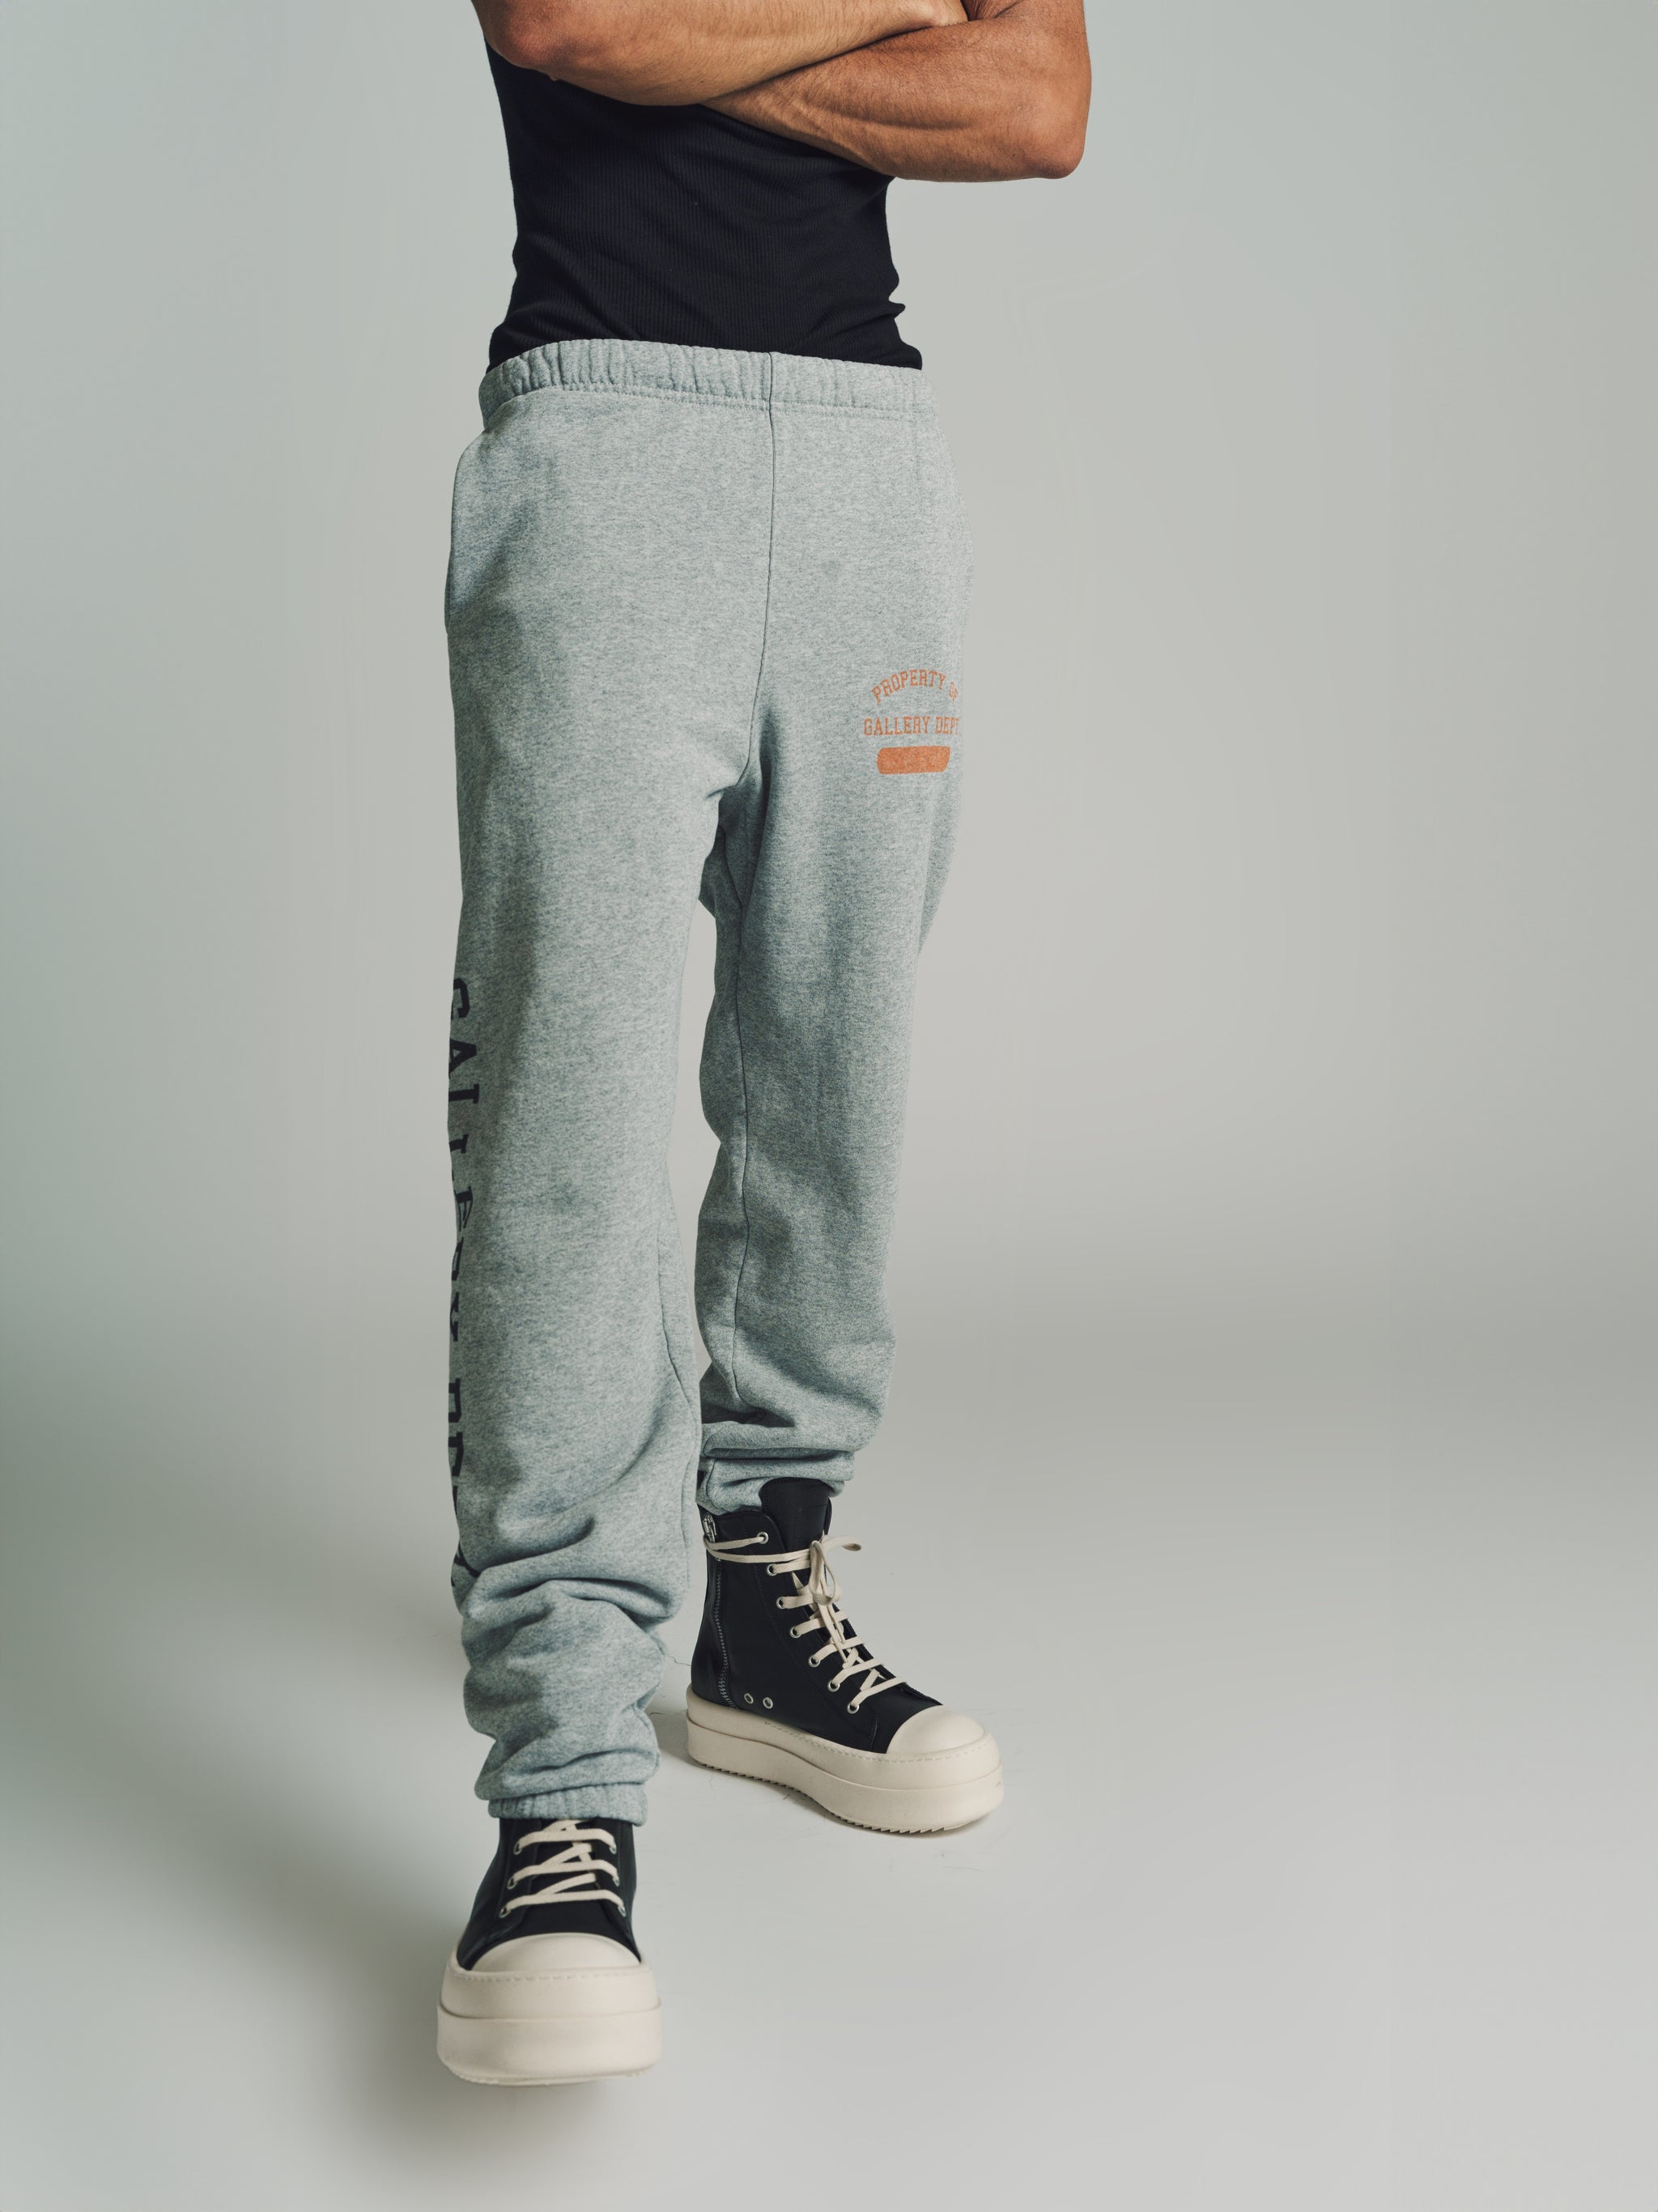 GALLERY DEPT. Gd Property Sweatpants in Gray for Men